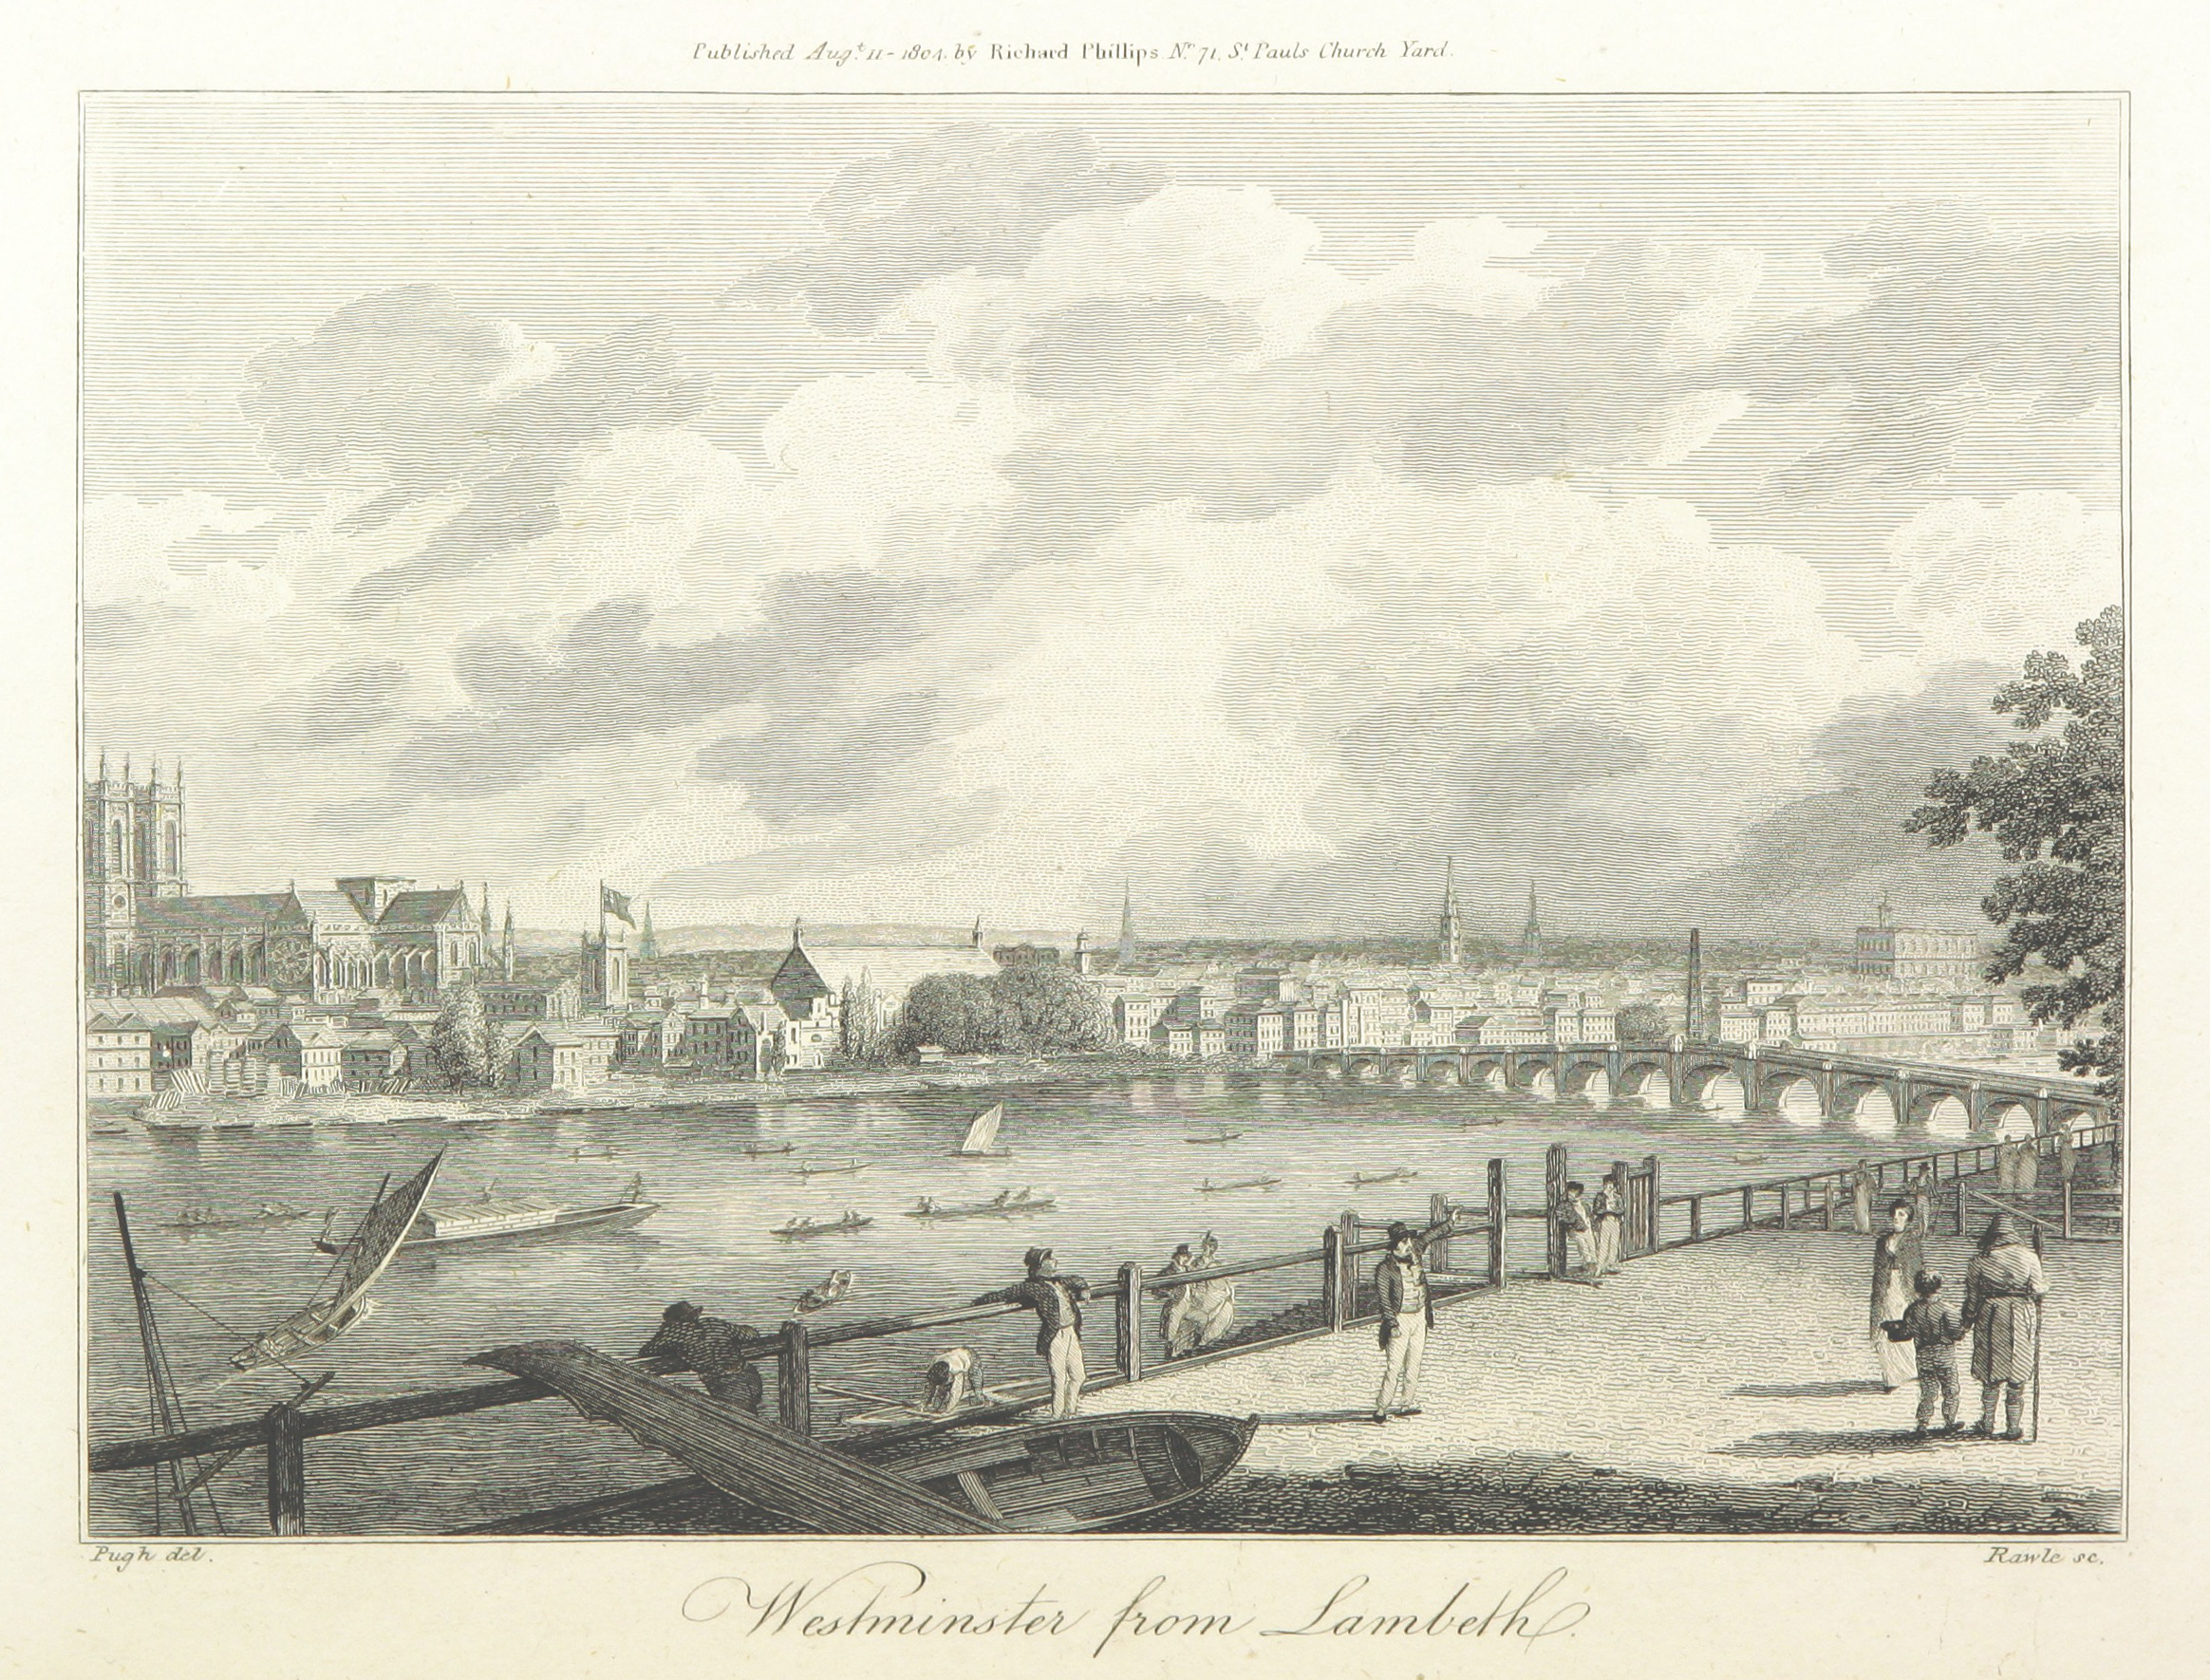 Phillips(1804)_p284_-_Westminster_from_Lambeth